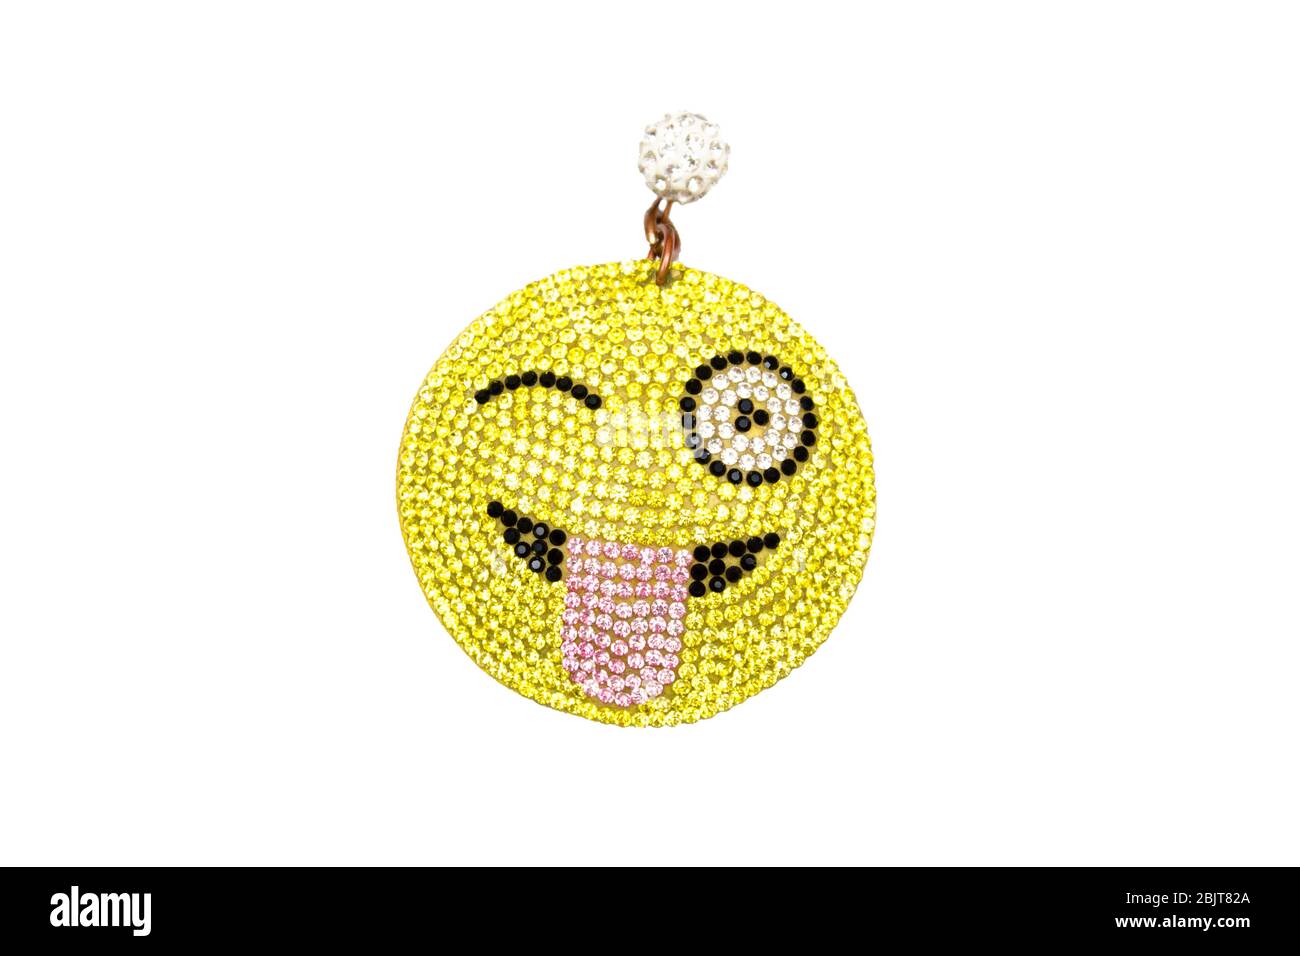 Smiley with tongue made of rhinestones on a white background isolate Stock Photo